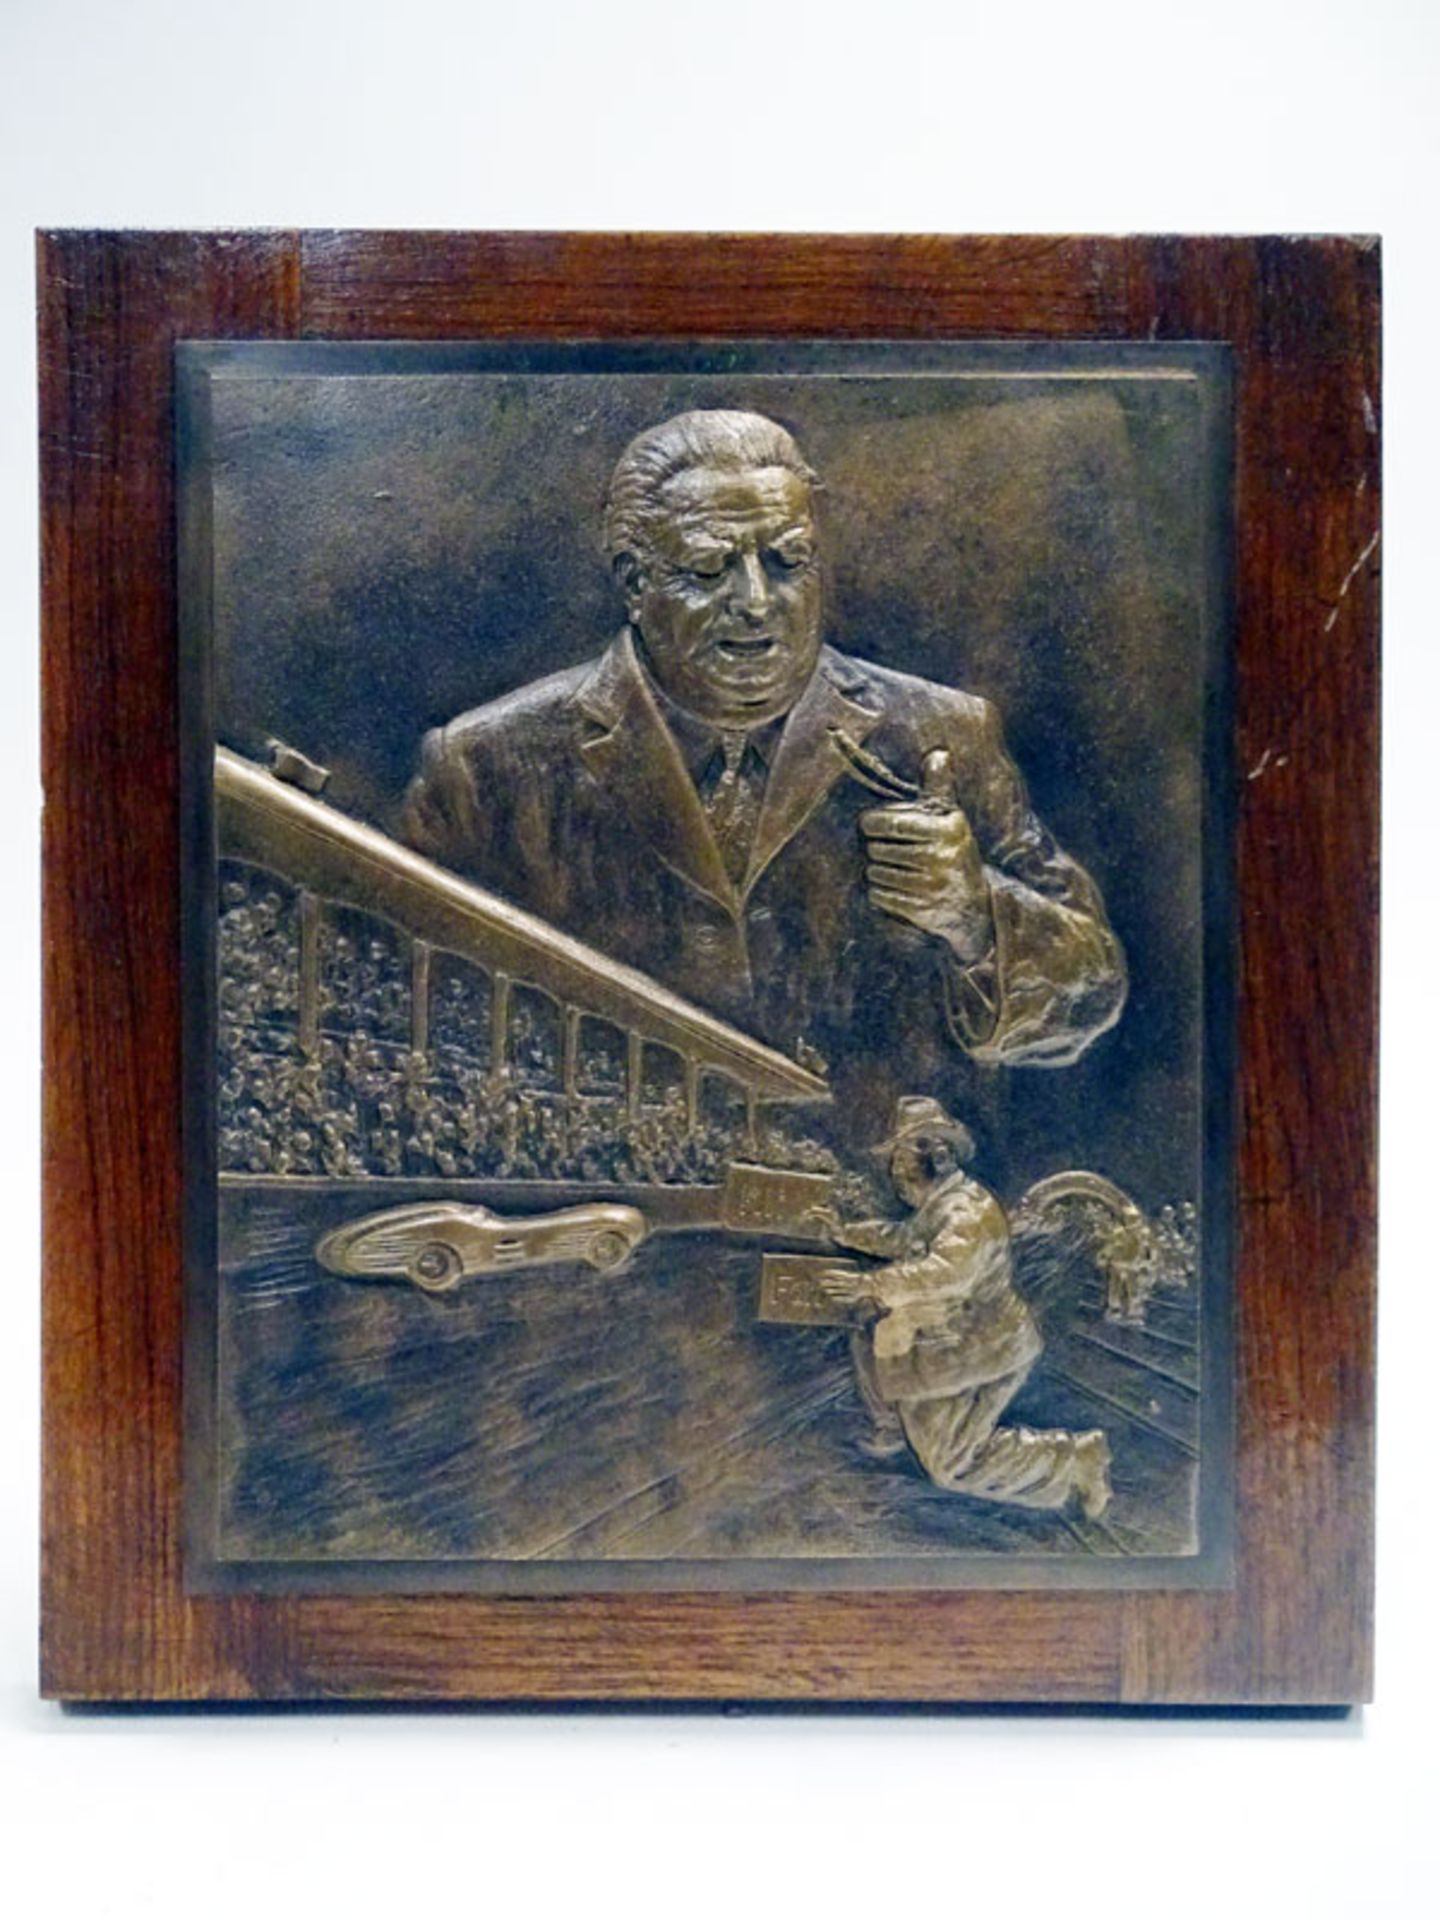 The Alfred Neubauer Trophy